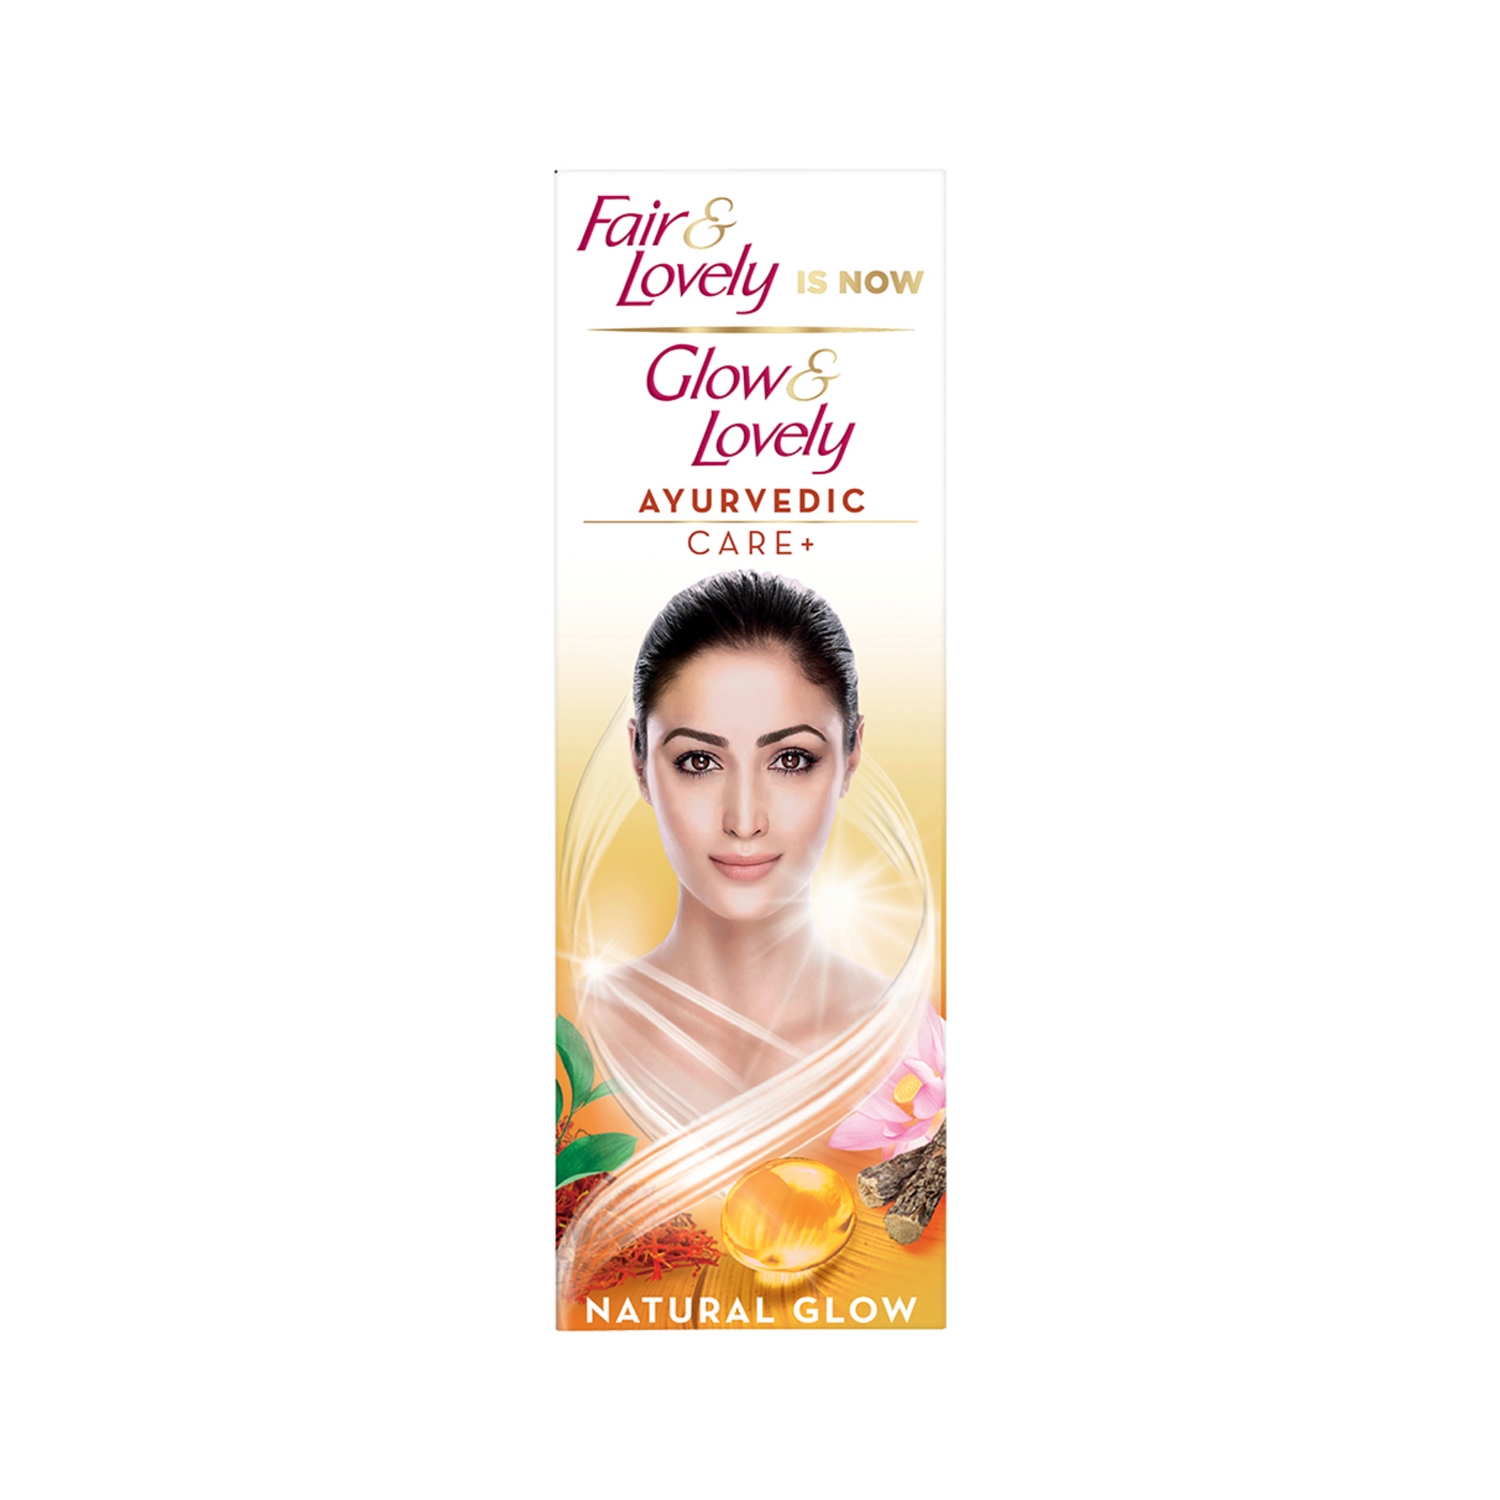 Glow & Lovely | Glow & Lovely Ayurvedic Care+ Natural Face Cream (50g)